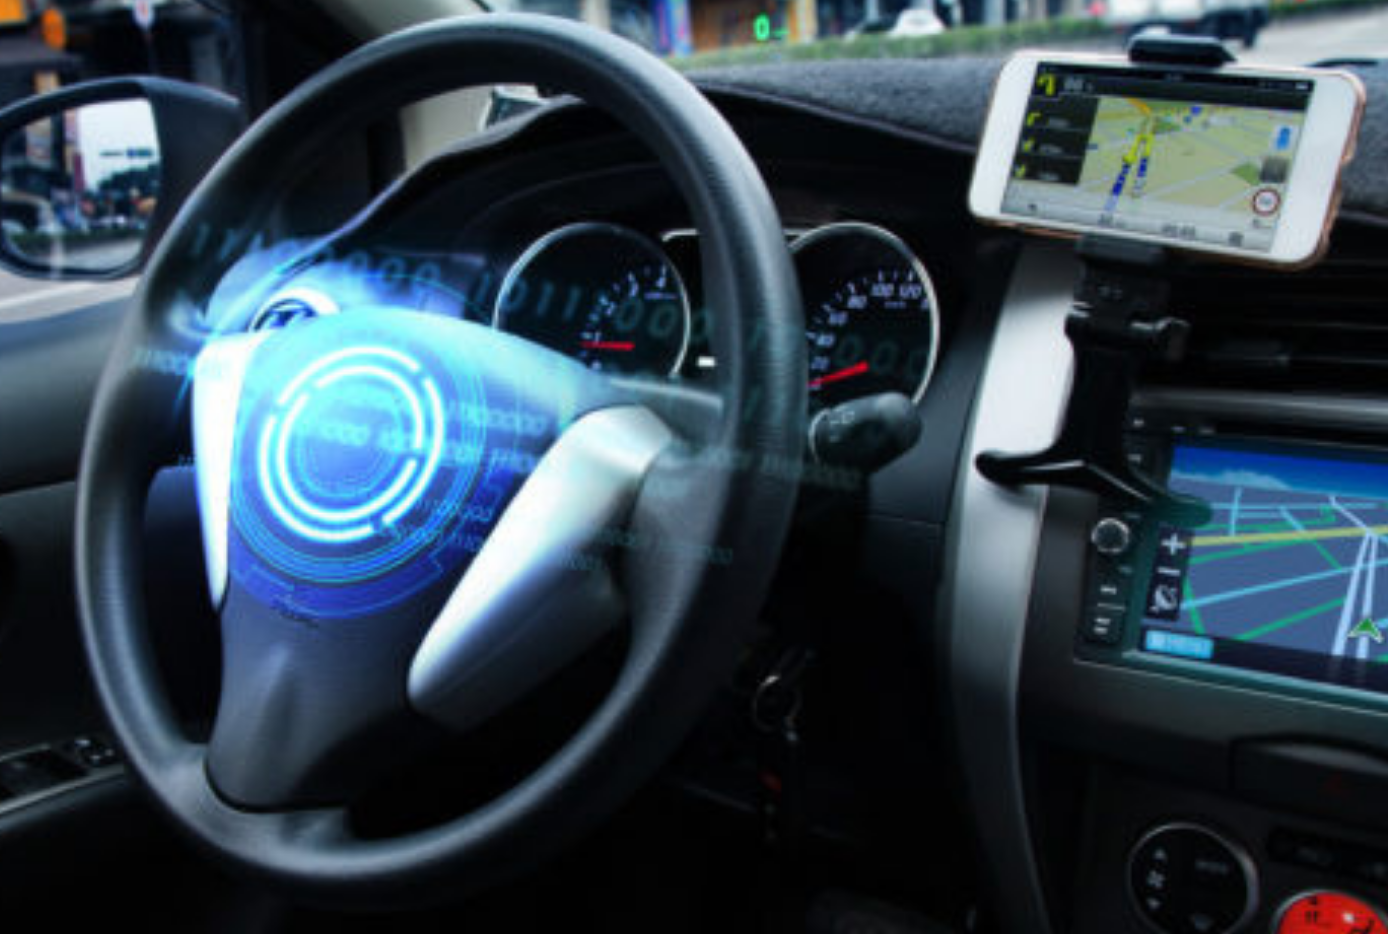 Hands-free cars A stepping stone to the future